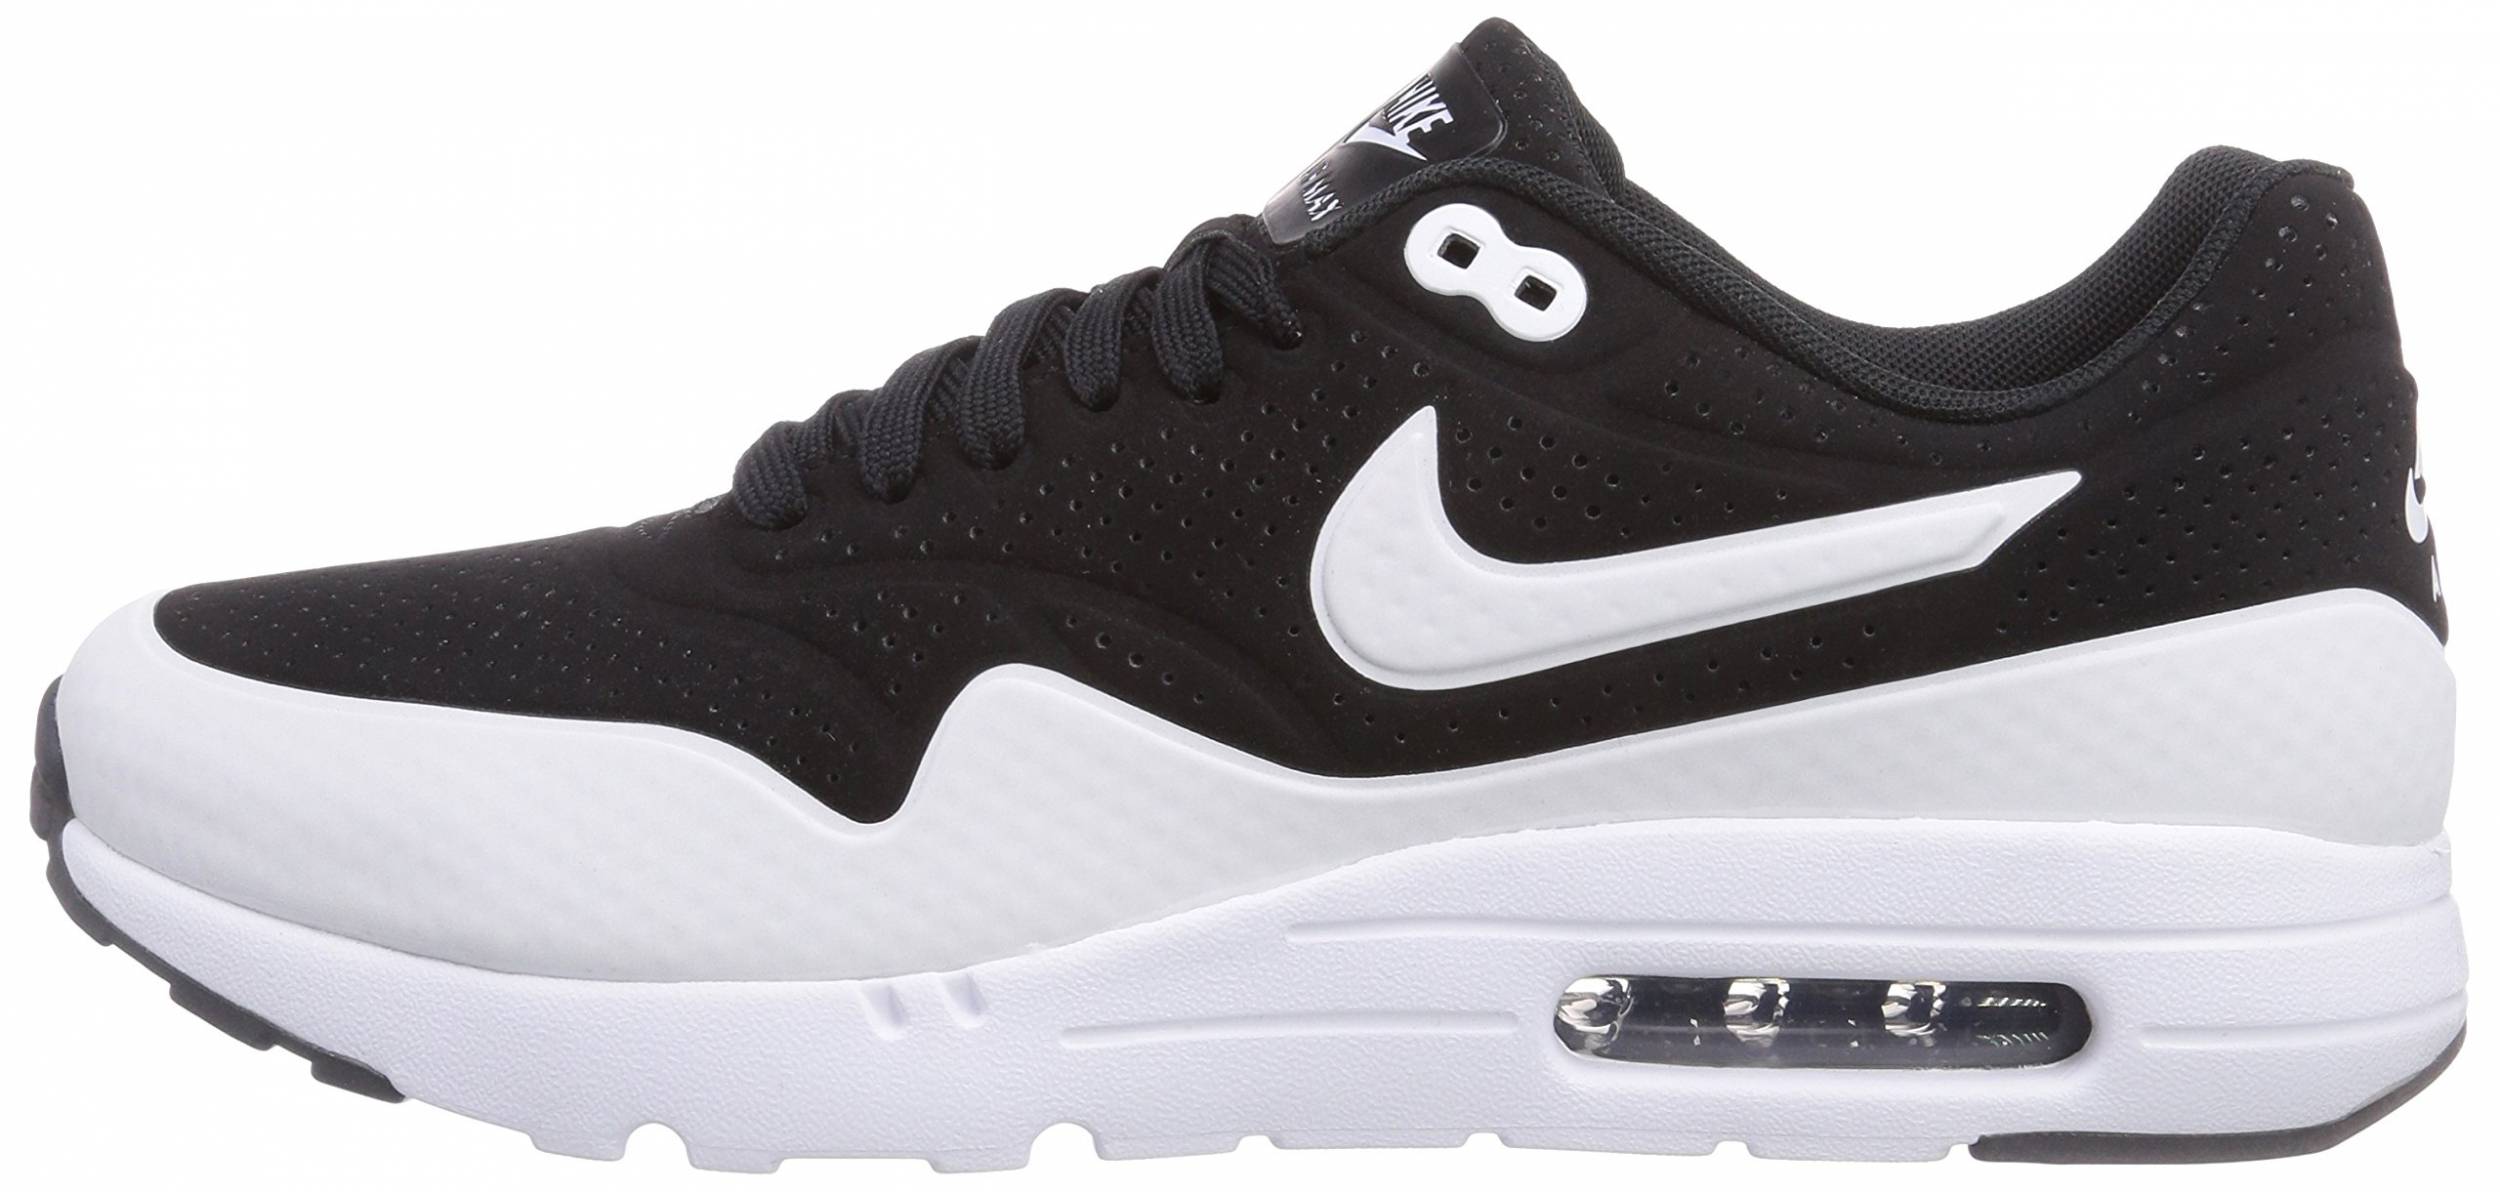 Nike Air Max 1 Ultra Moire sneakers in 